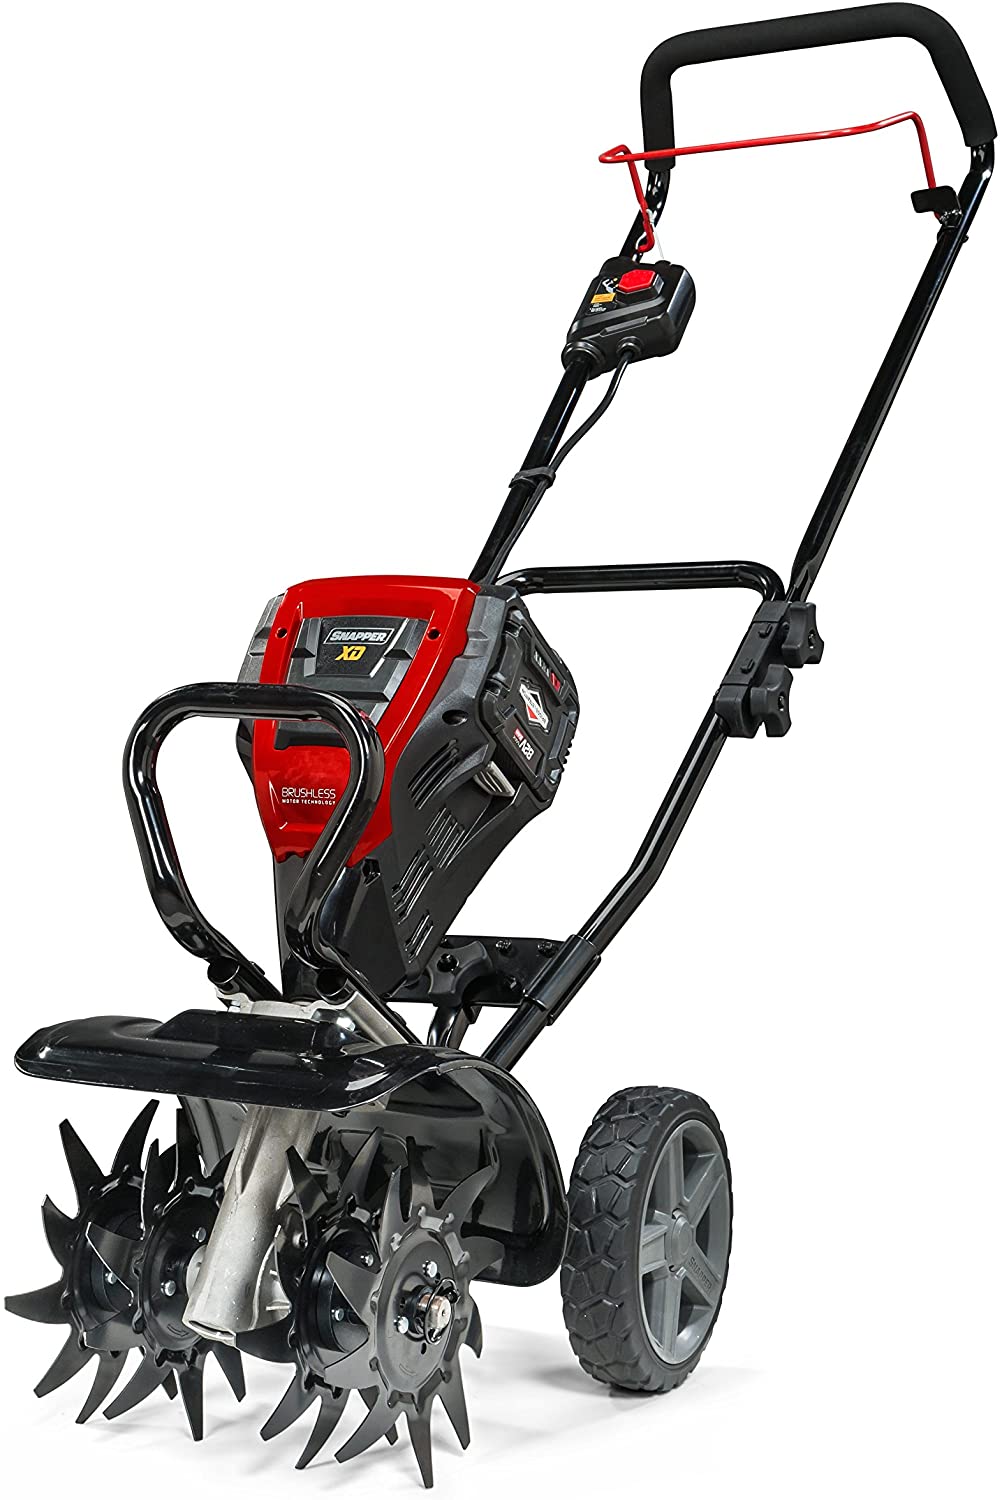 Snapper xd82v cordless electric cultivator